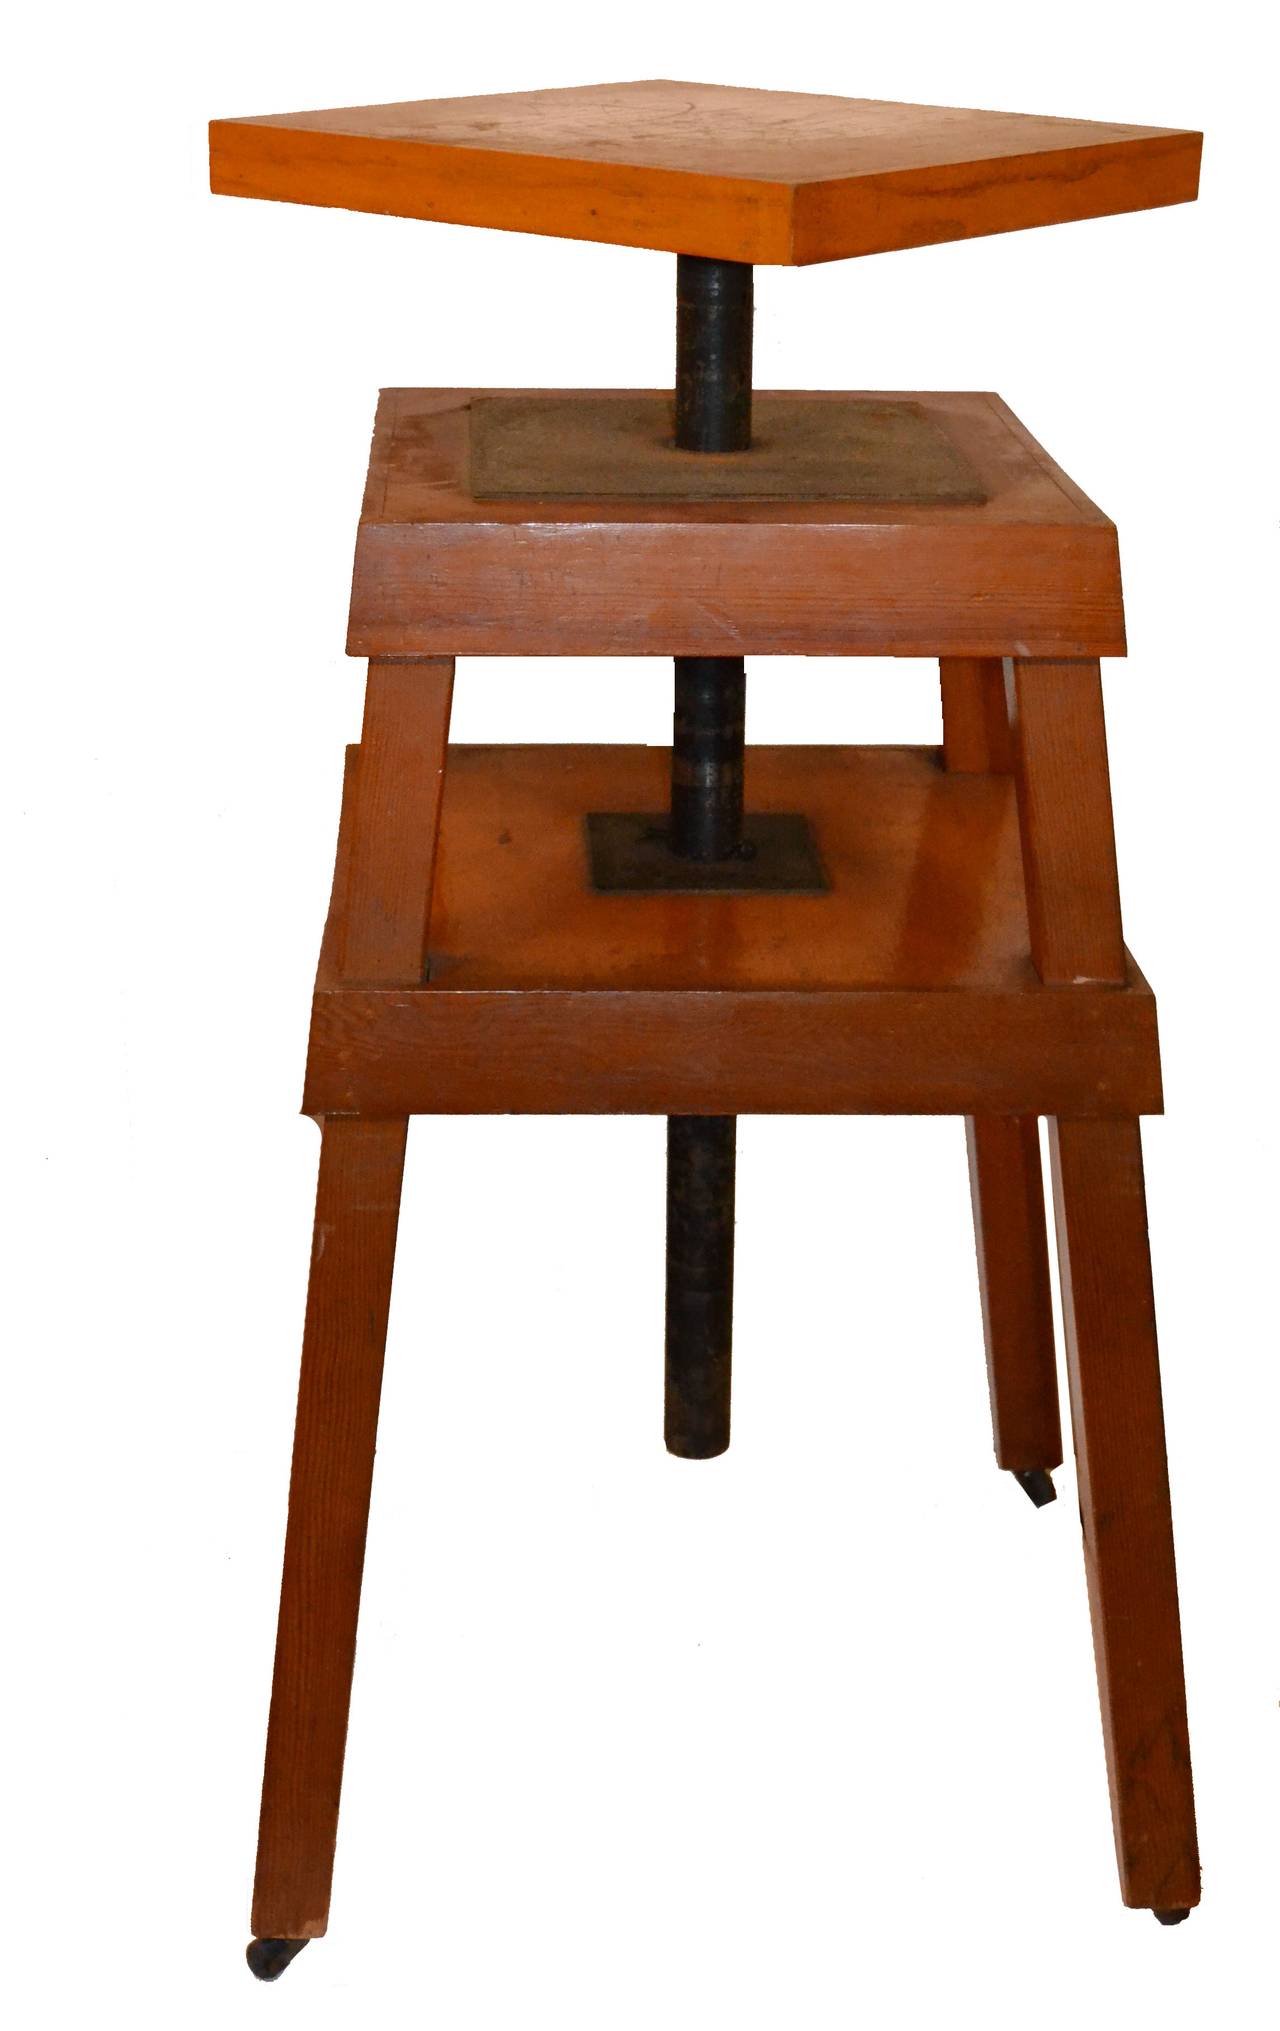 Purchased as part of an estate of a listed stone sculptor, this substantial Mid-Century sculptor's stand is fully adjustable and rotating and beautiful in its functional strength and simplicity. Heavy duty, this stand and its matching tool cart is